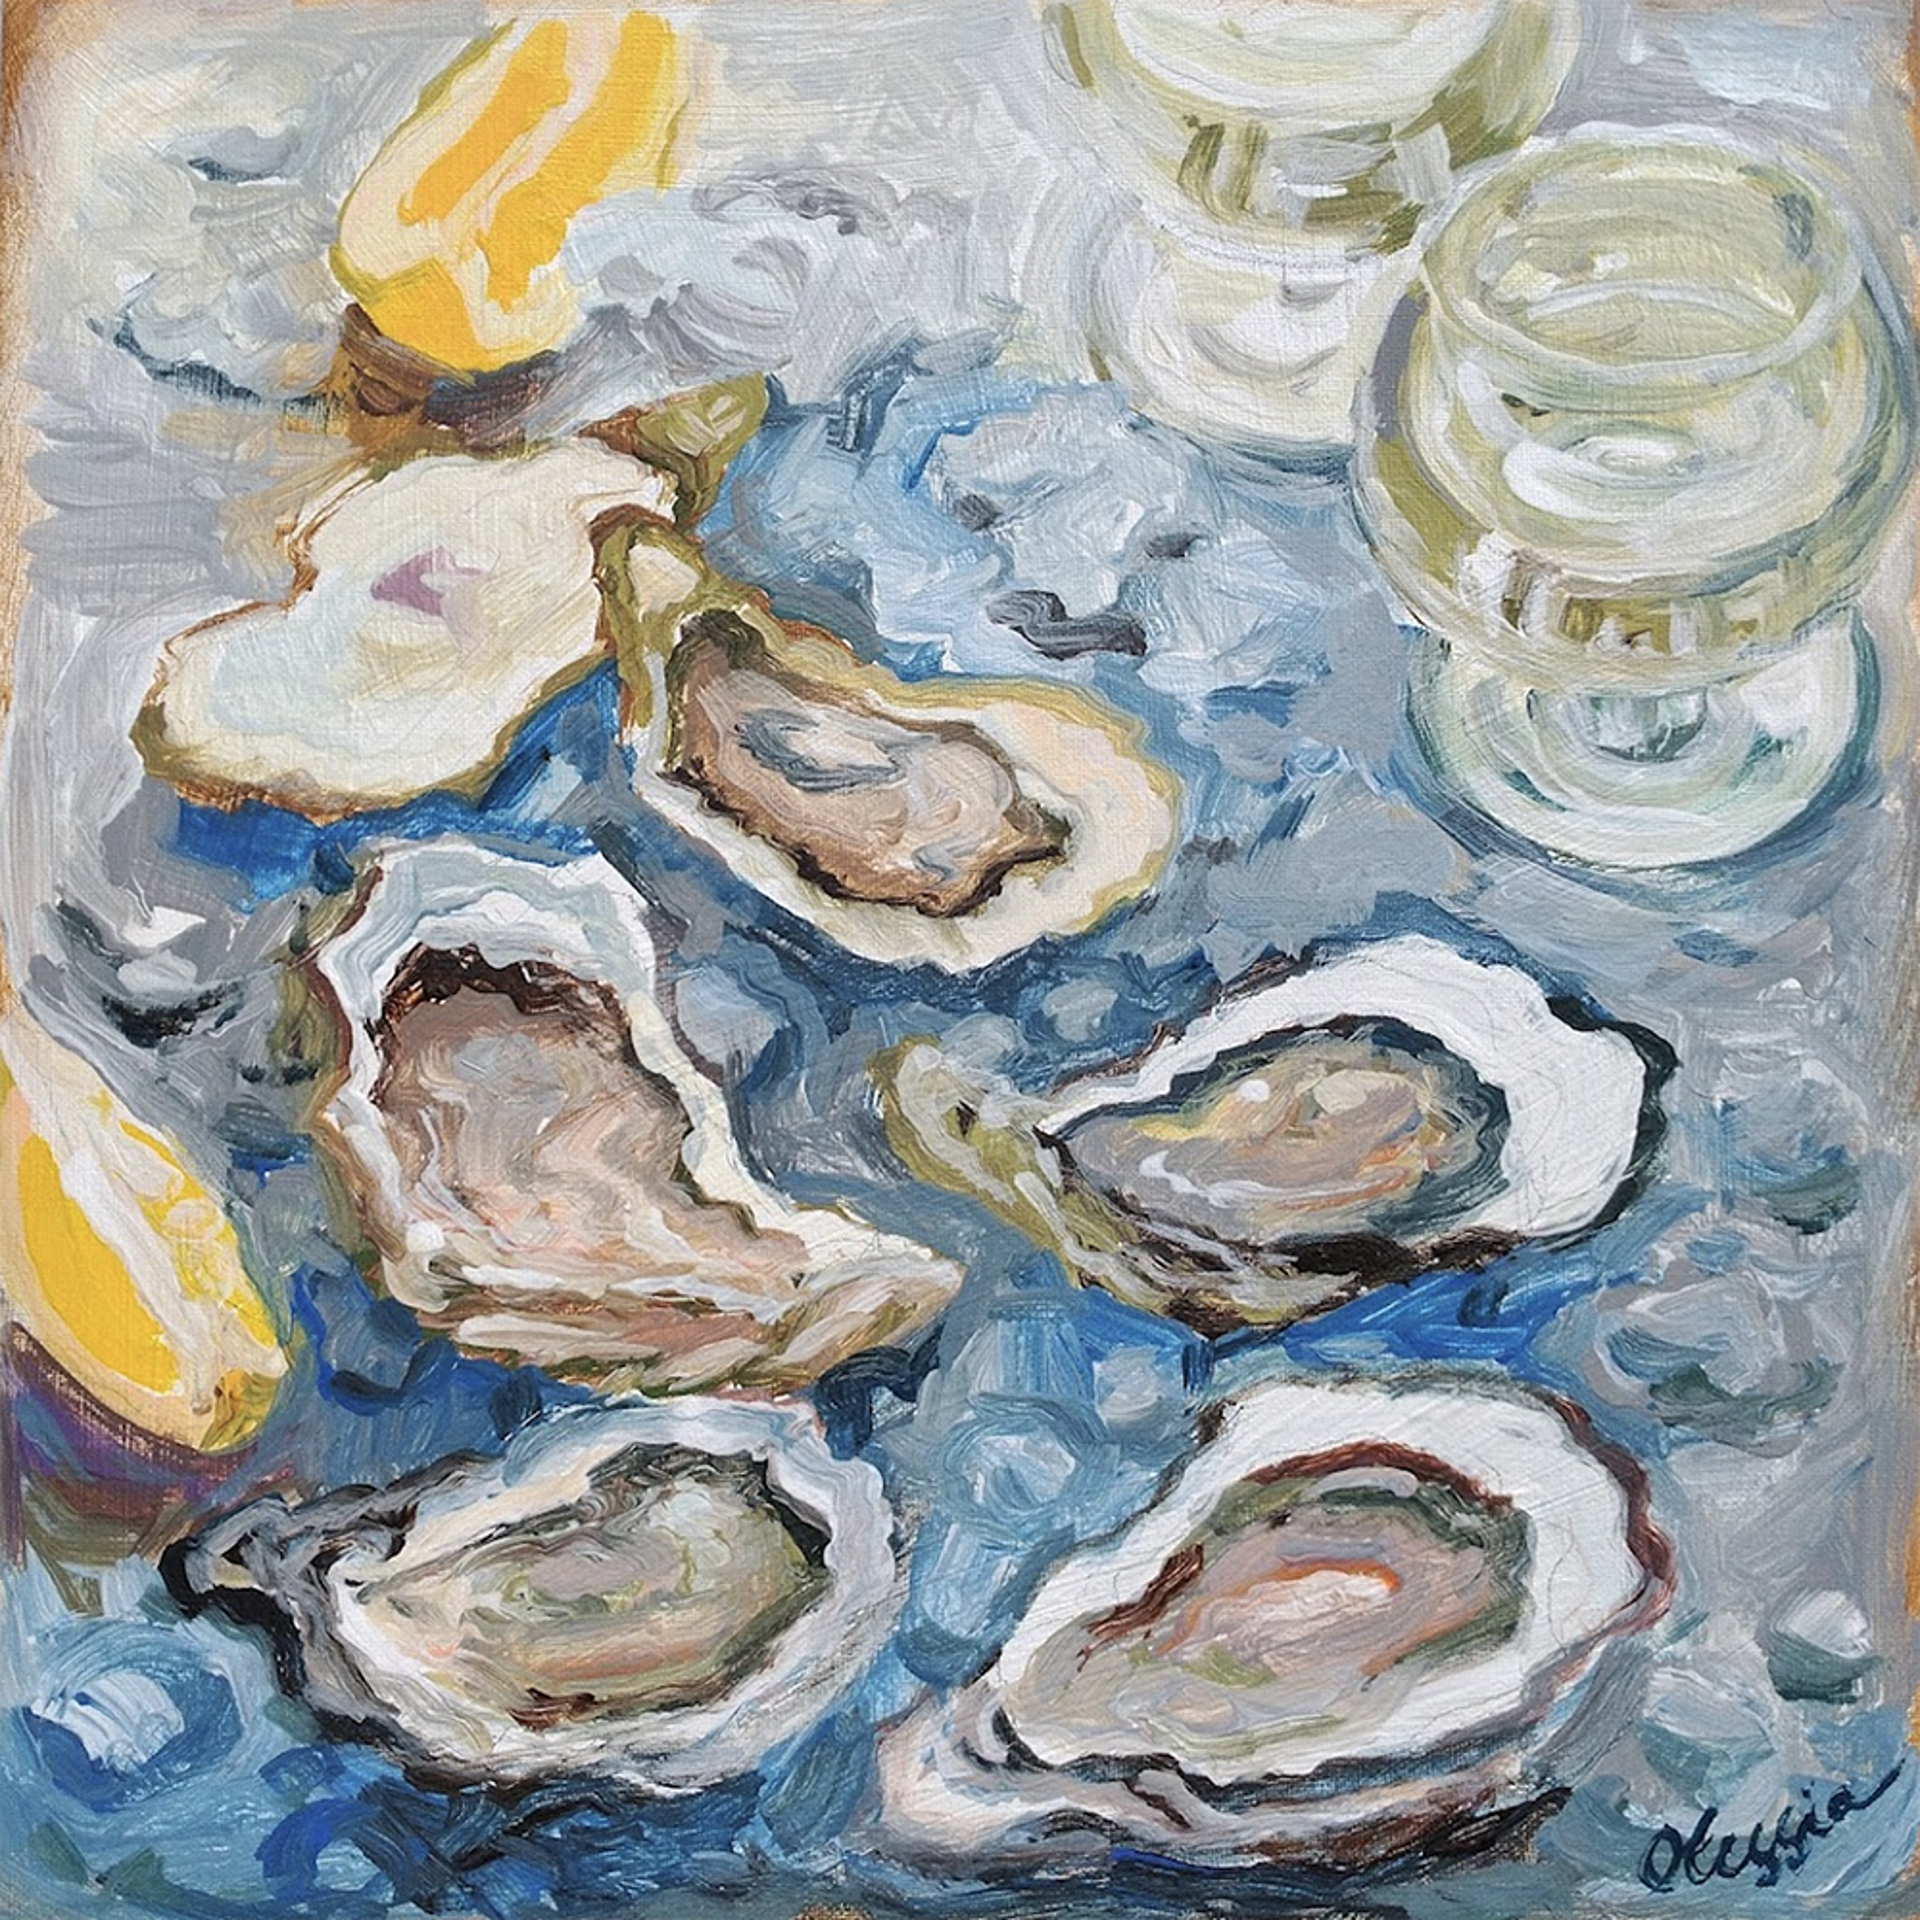 "Oysters for Two" original acrylic painting by Olessia Maximenko